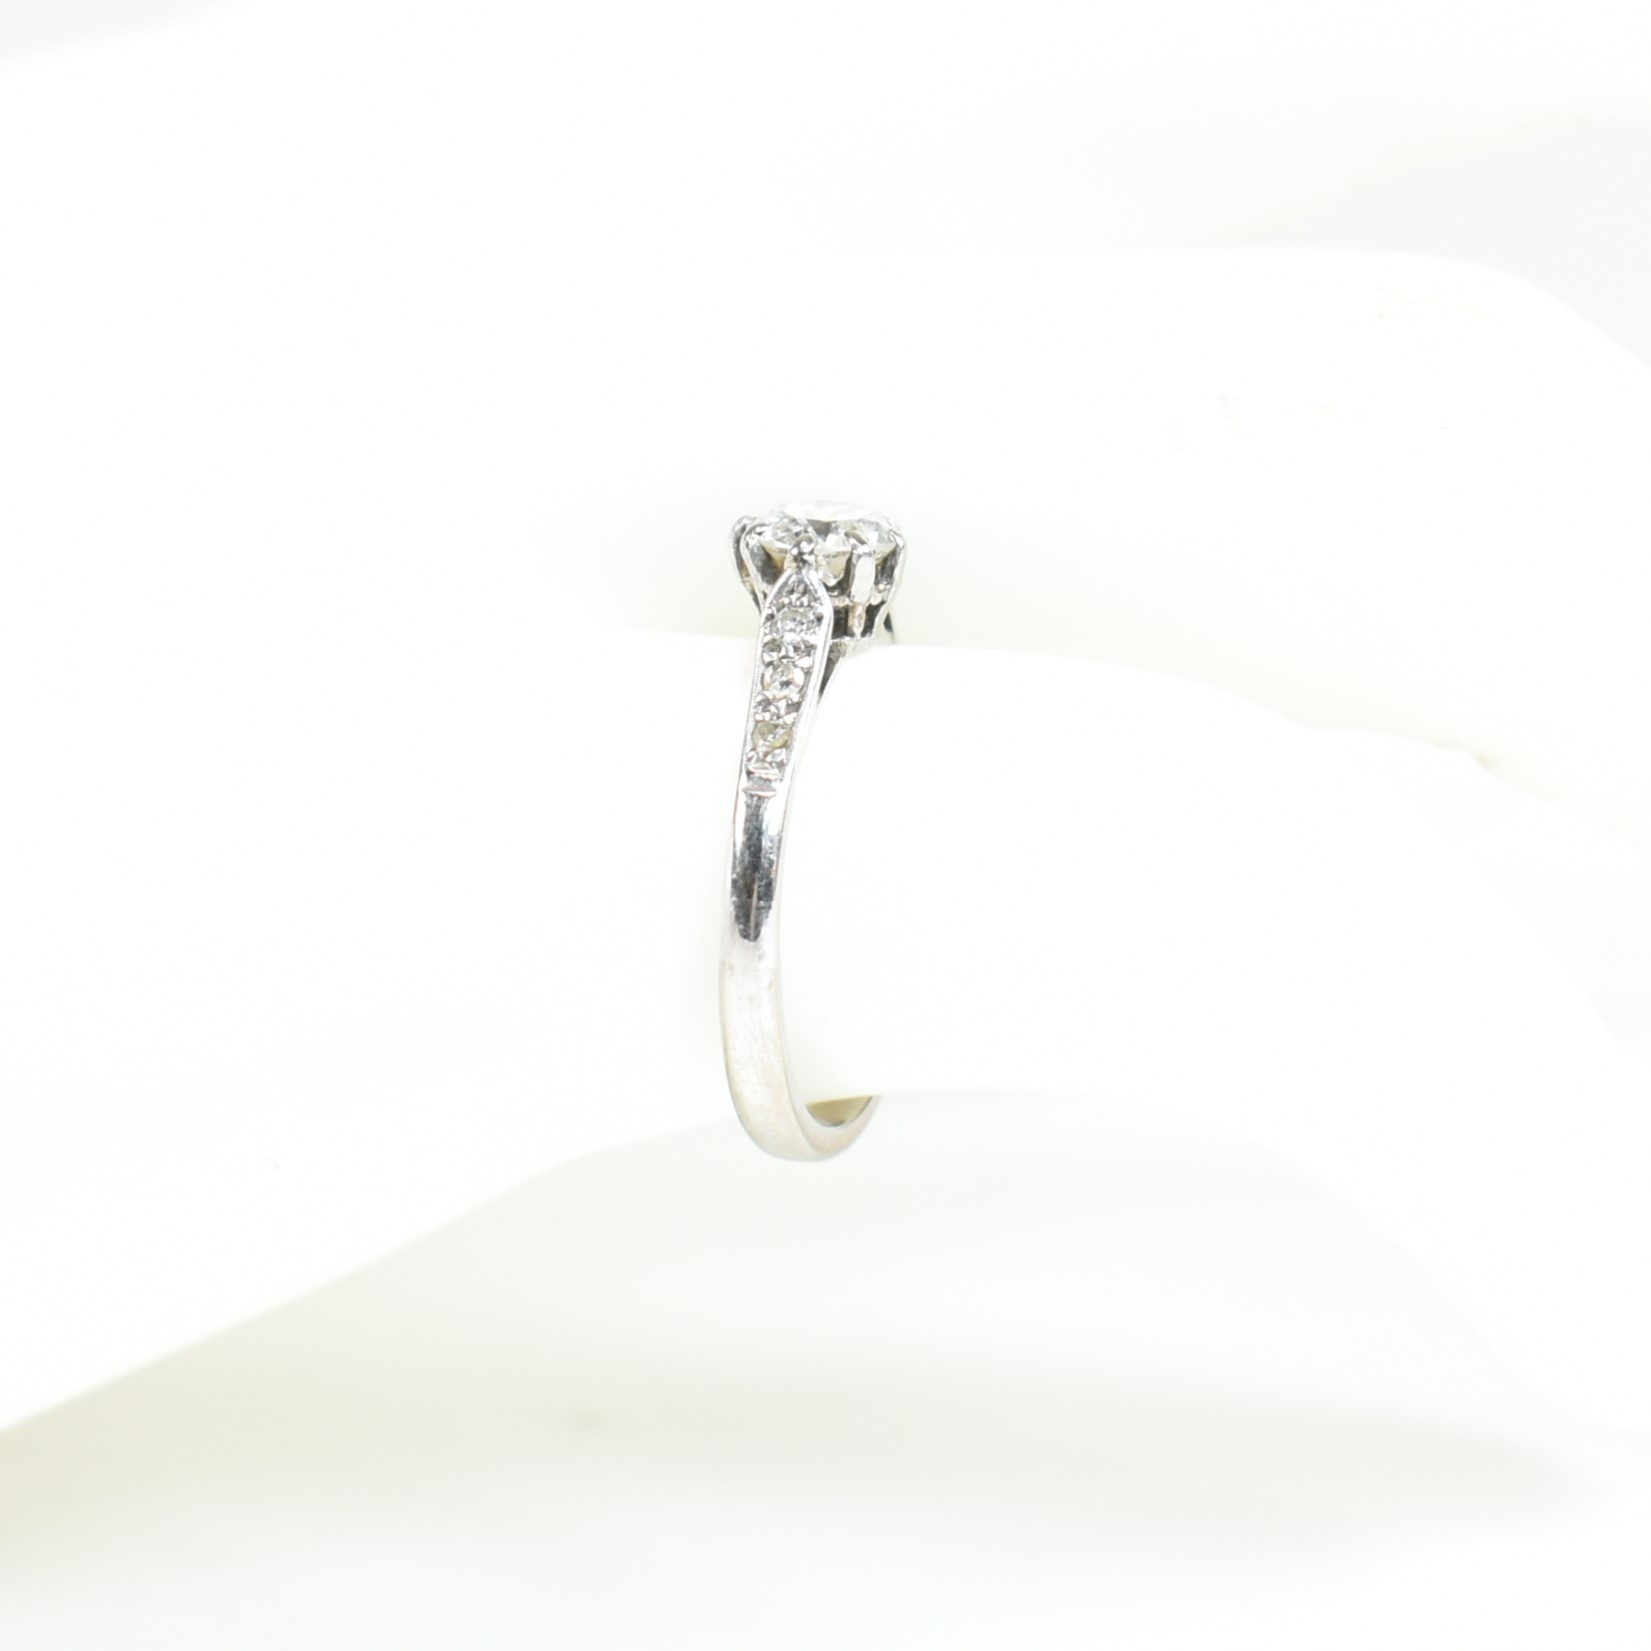 18CT WHITE GOLD & DIAMOND SOLITAIRE RING - Image 8 of 9